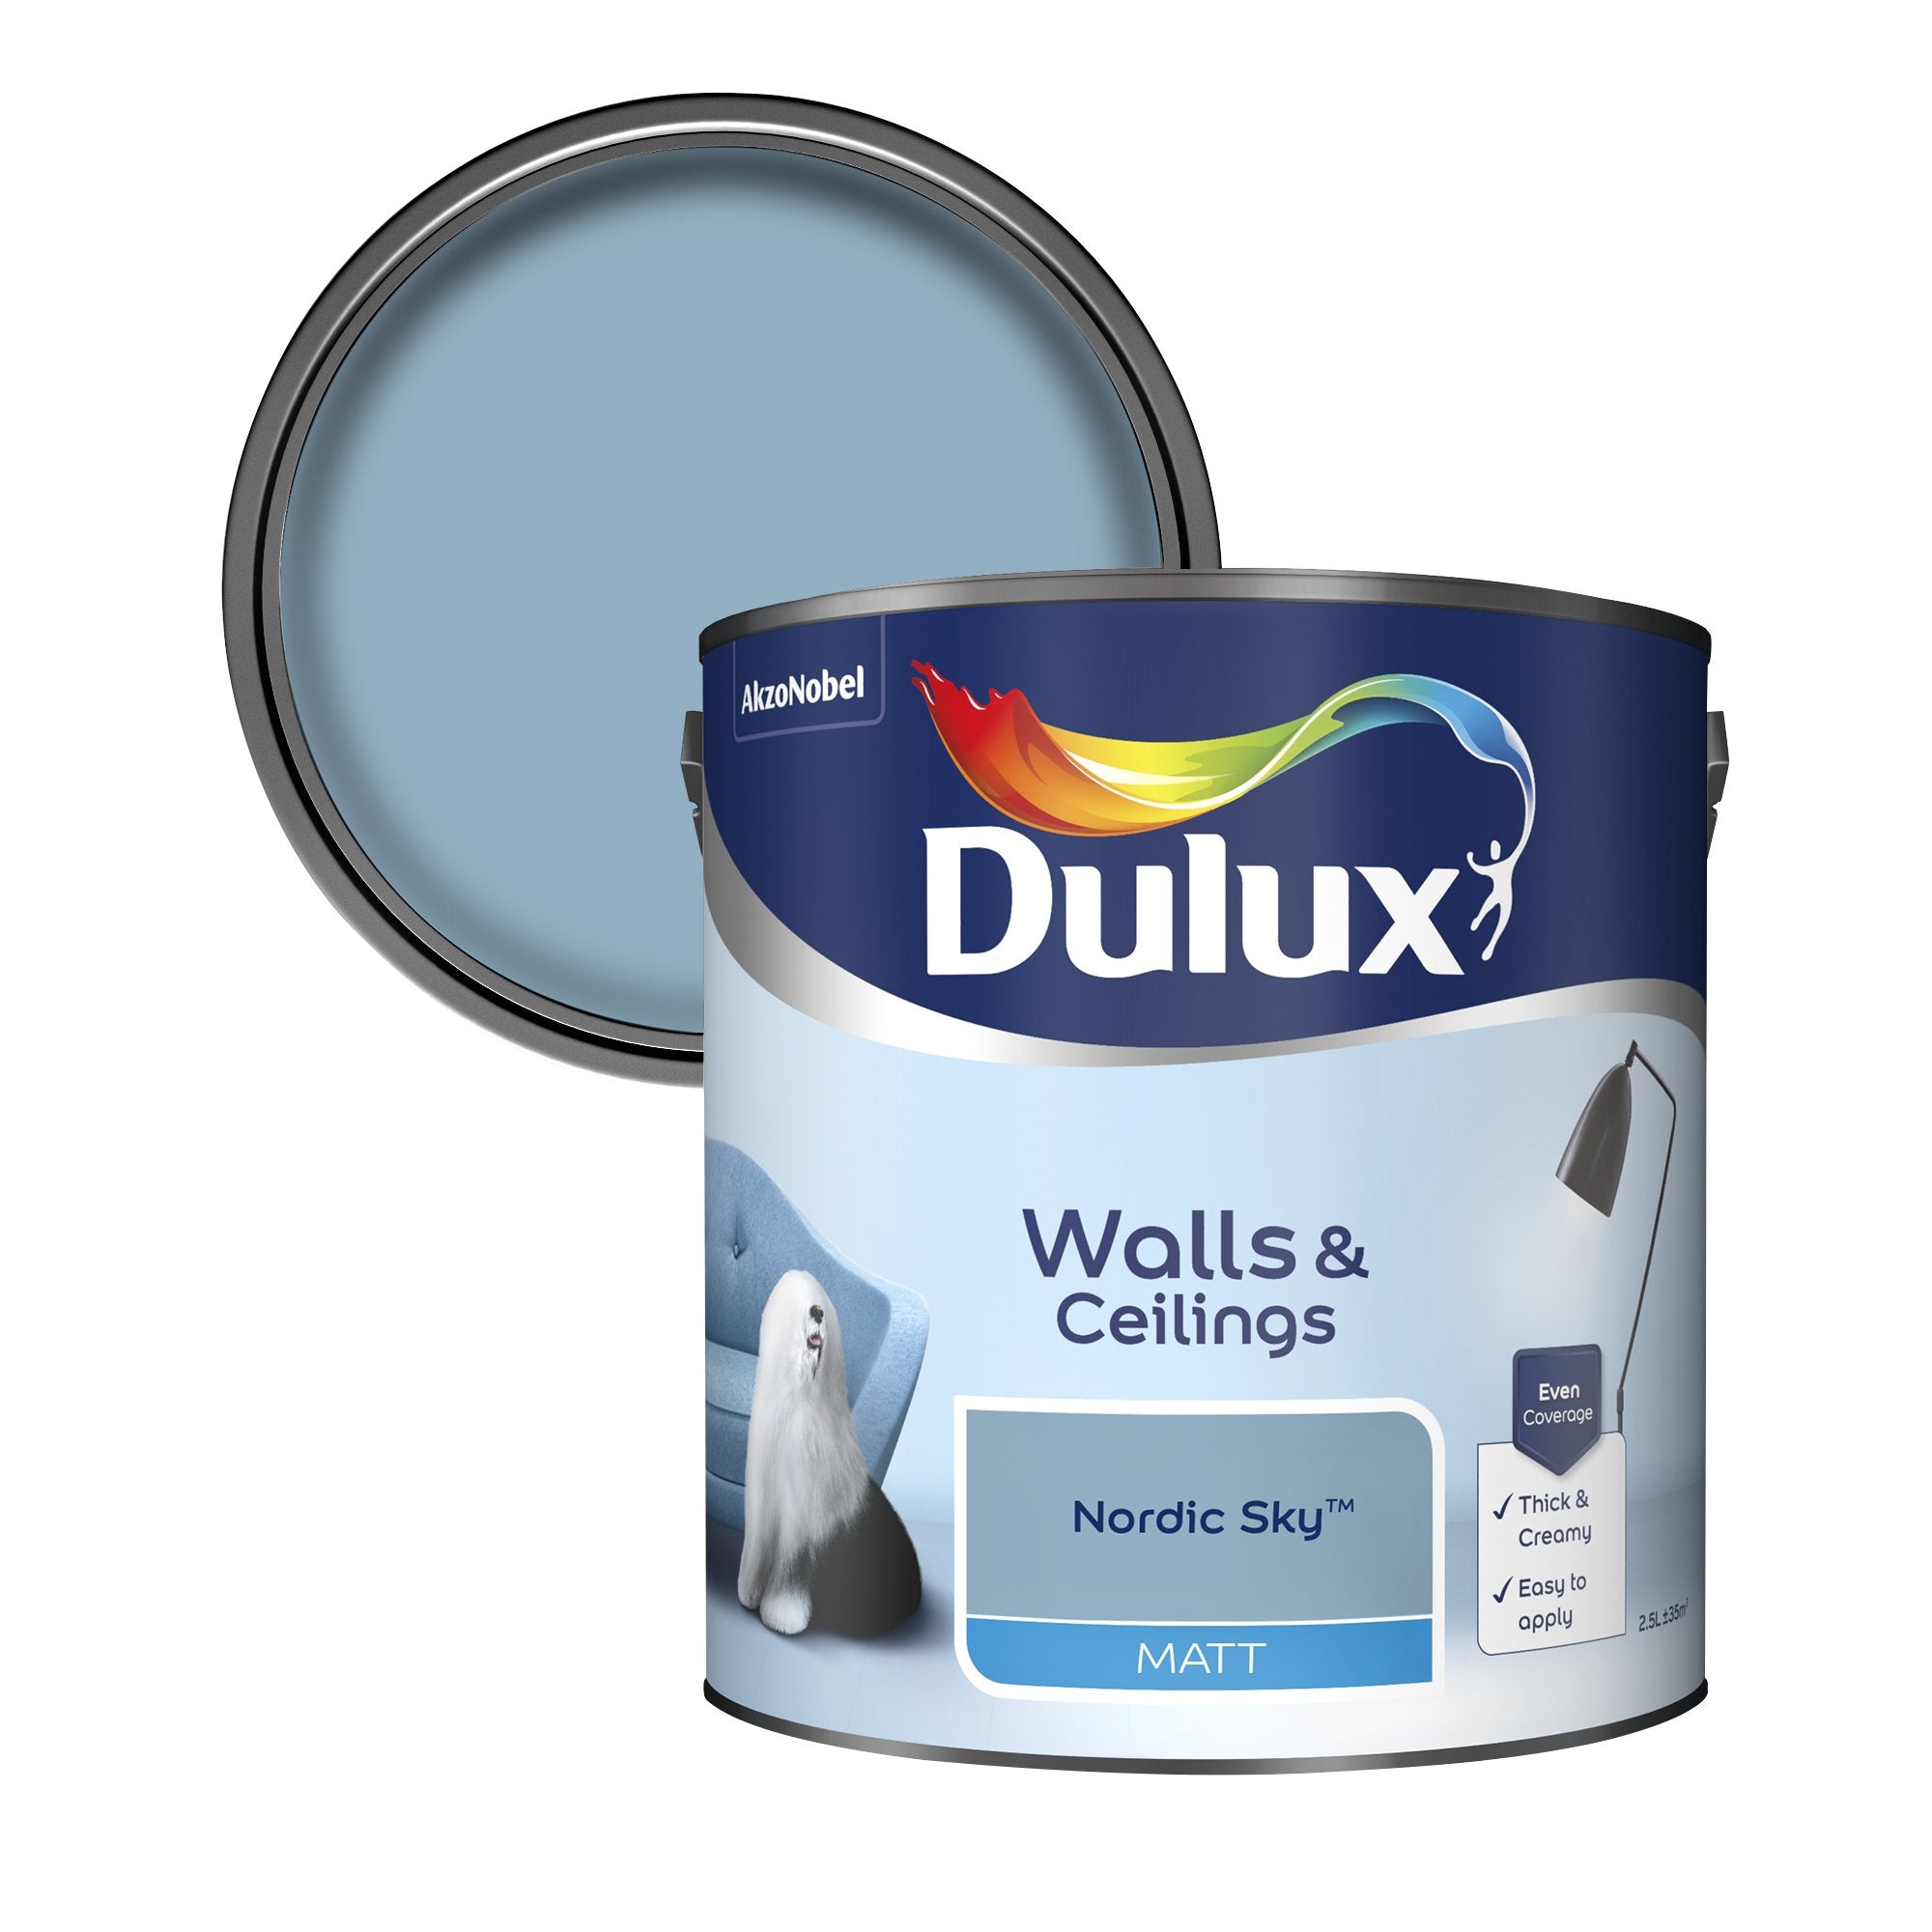 Dulux-Matt-Emulsion-Paint-For-Walls-And-Ceilings-Nordic-Sky-2.5L